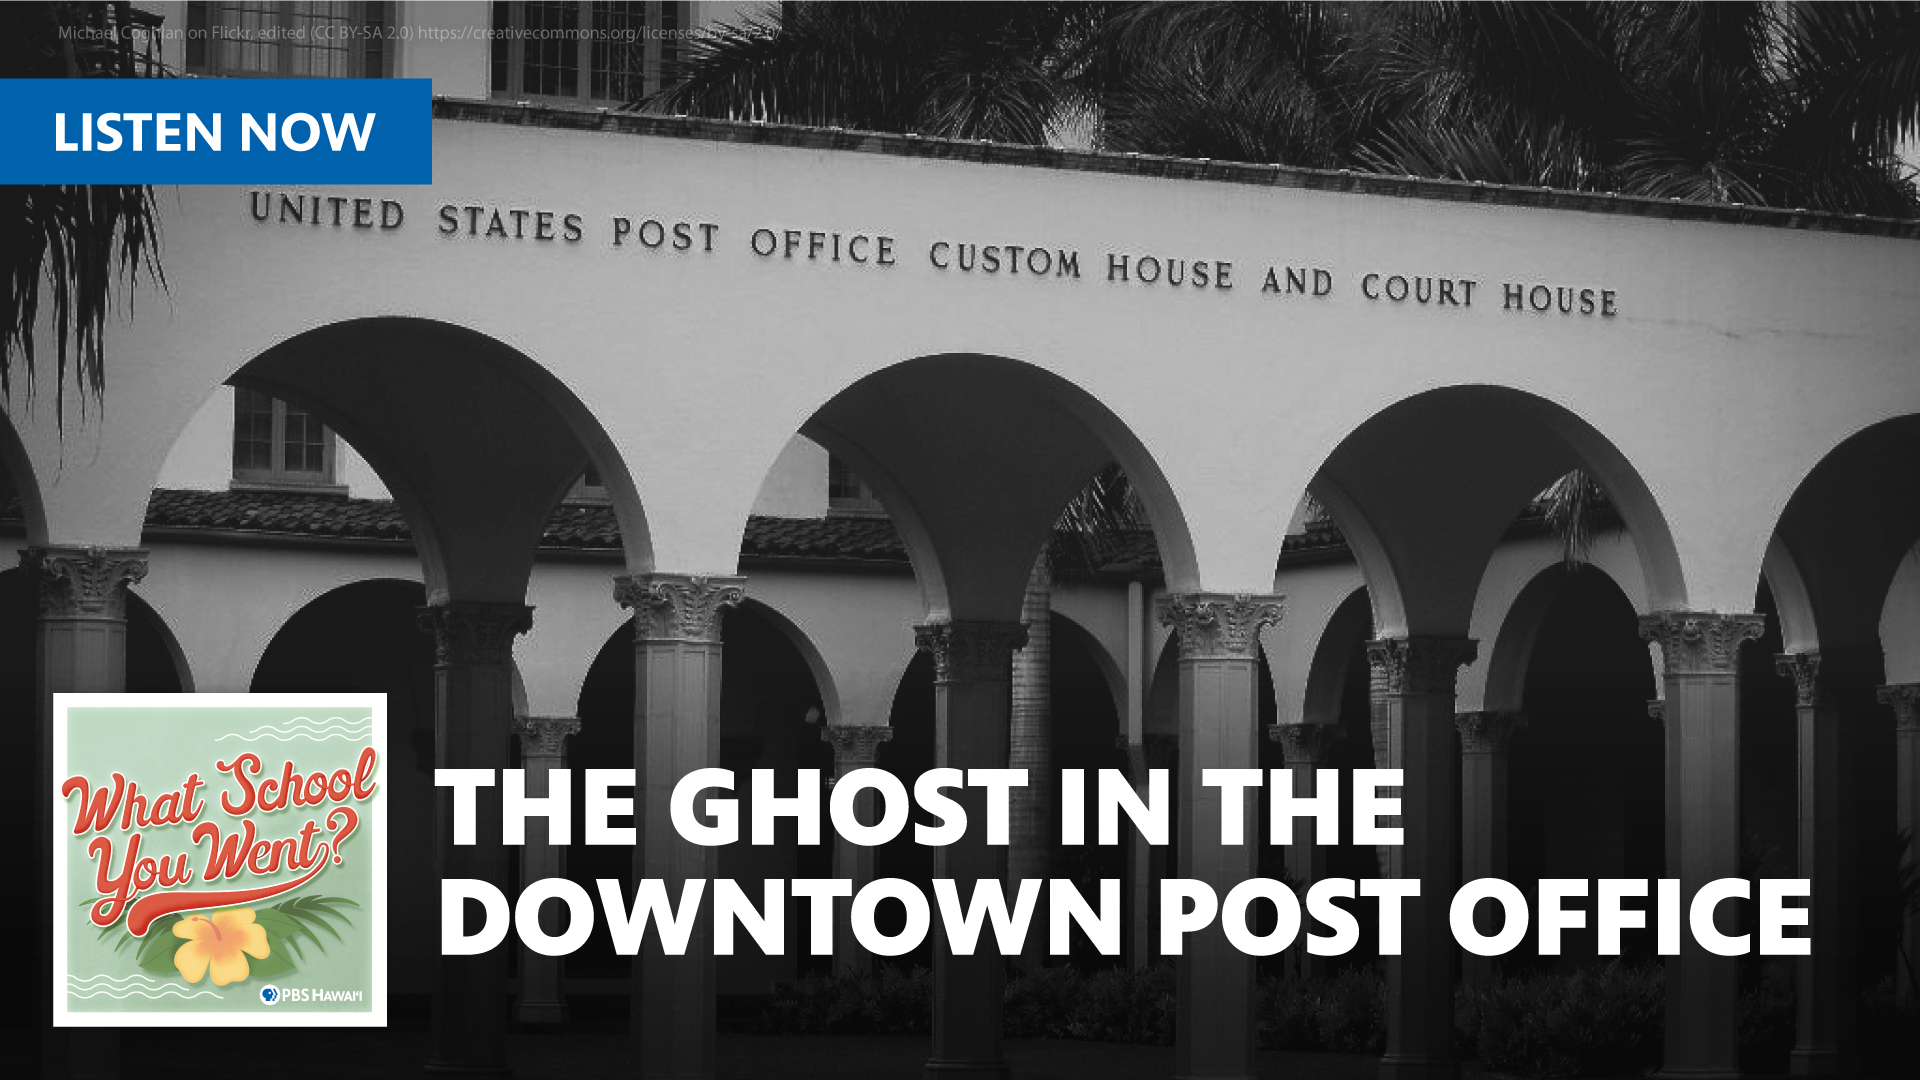 THE GHOST IN THE DOWNTOWN POST OFFICE